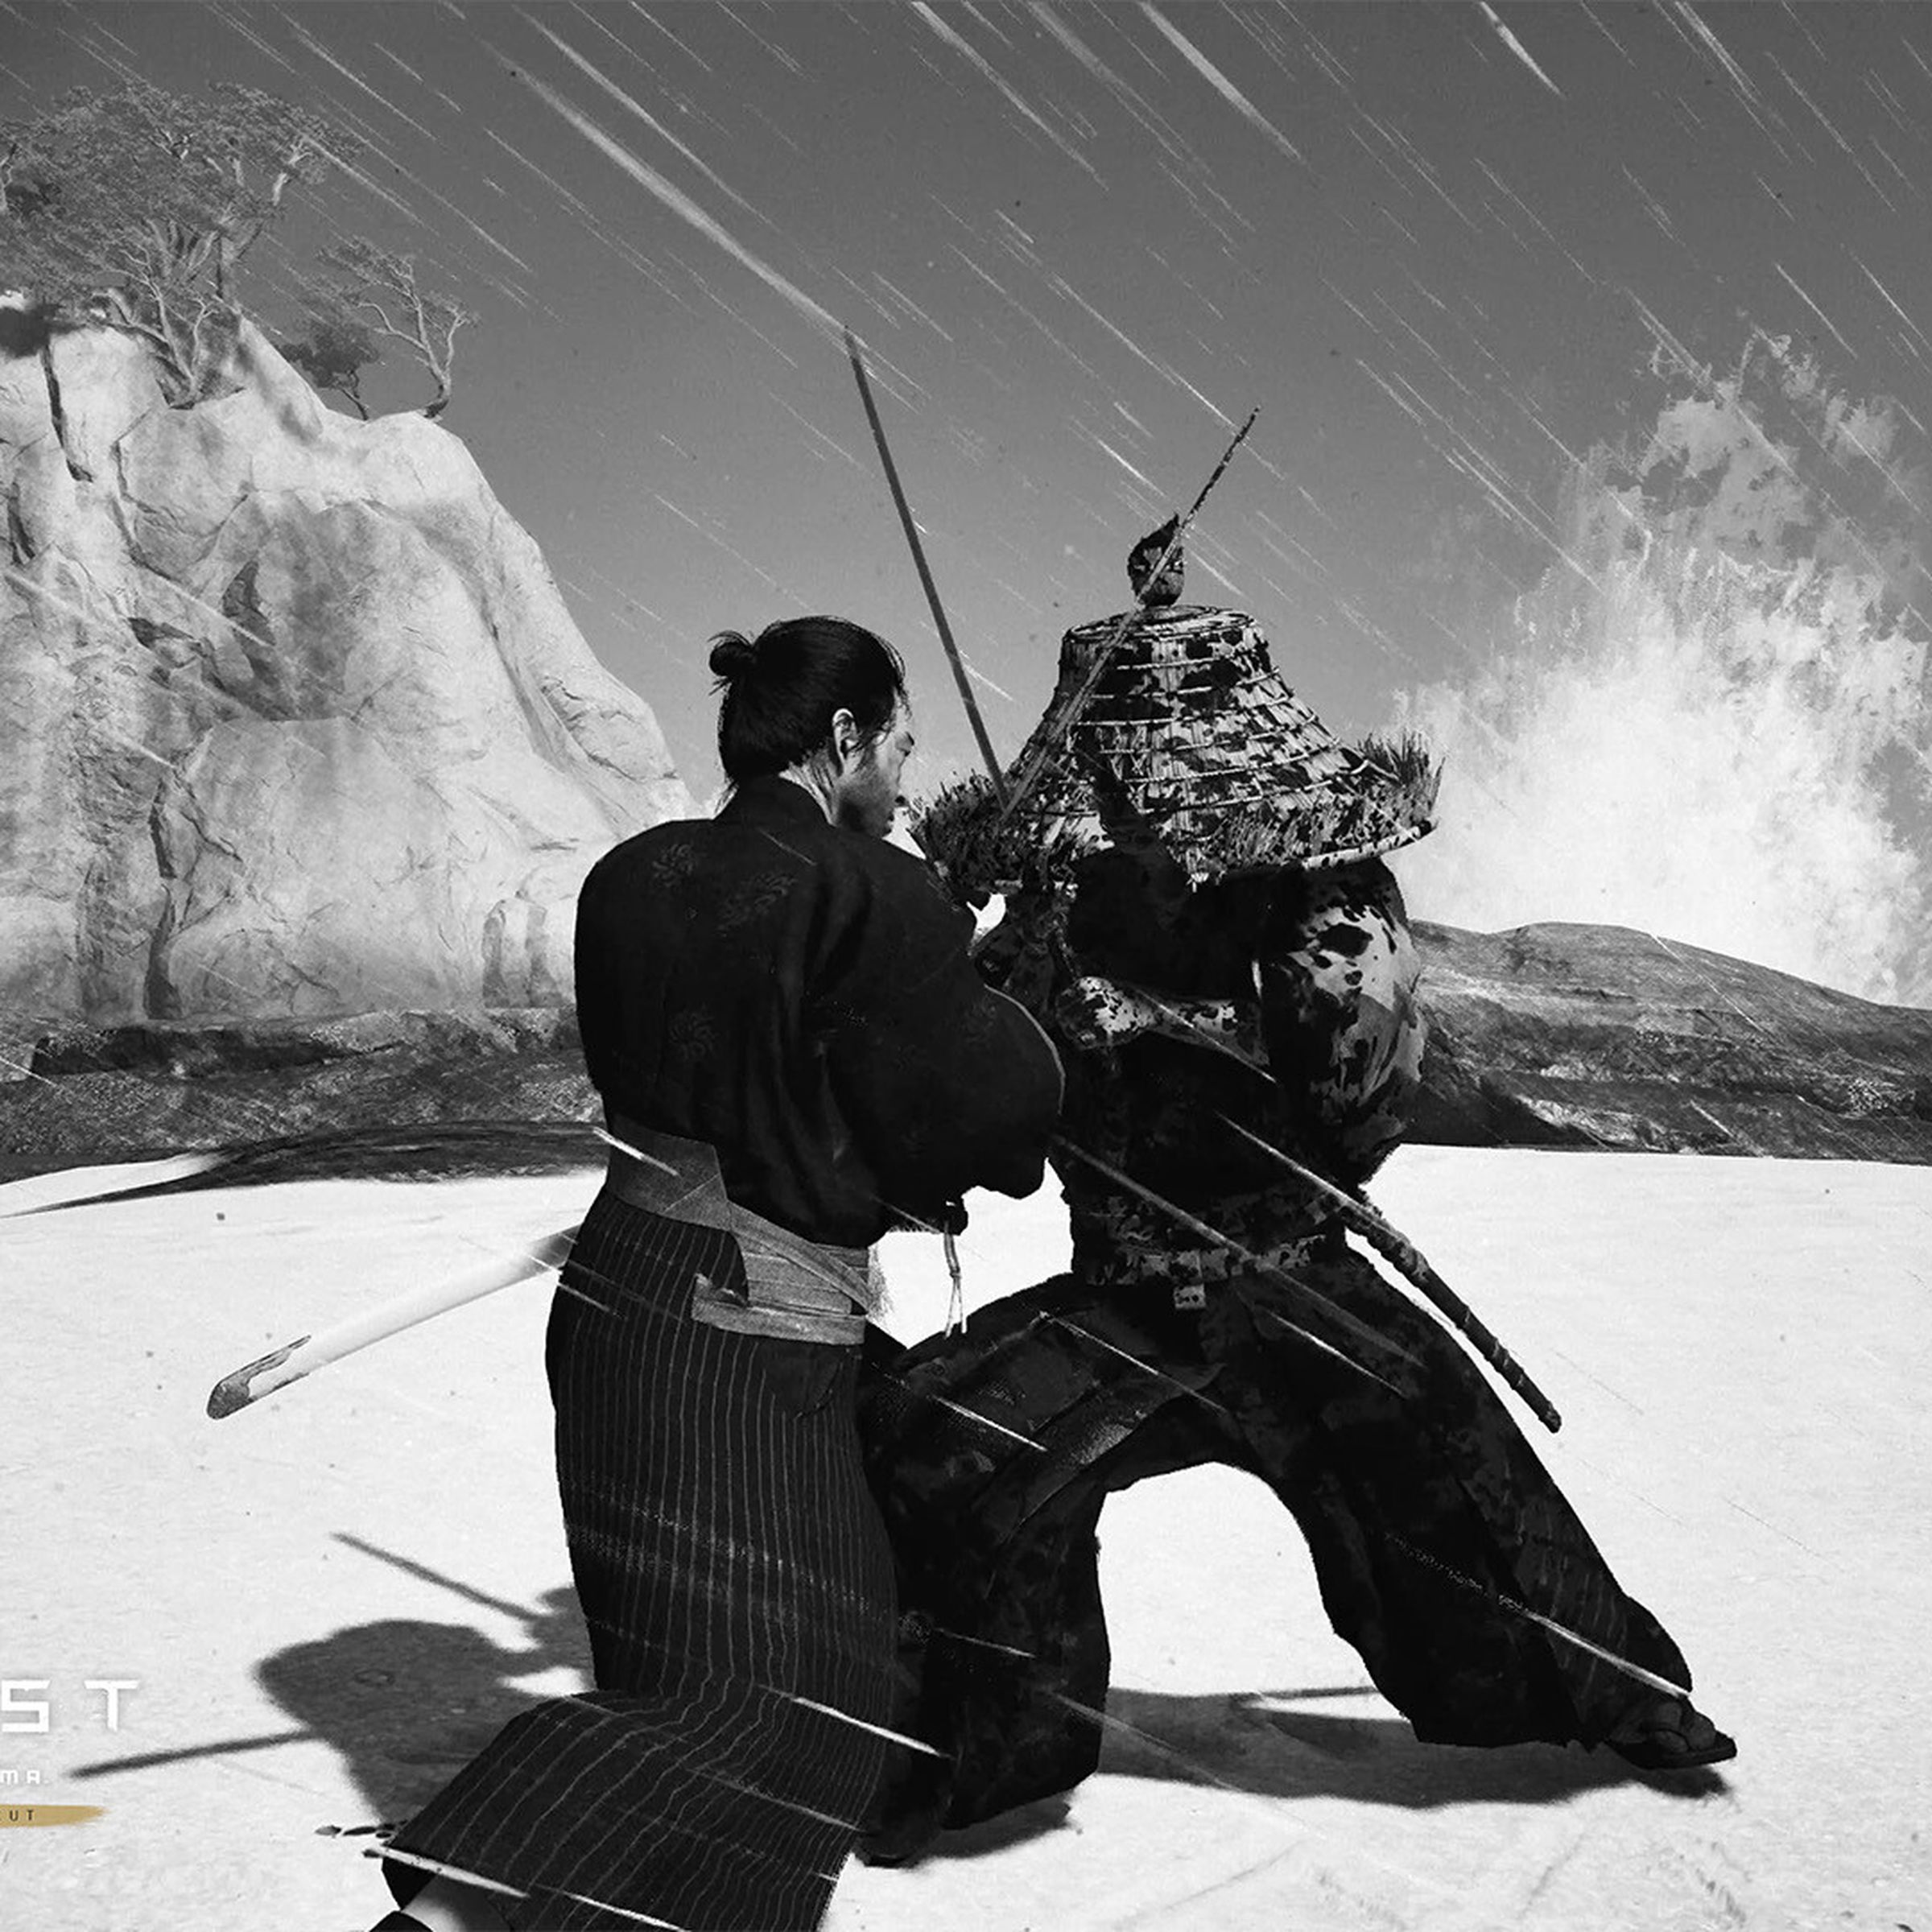 A screenshot of the video game Ghost of Tsushima.